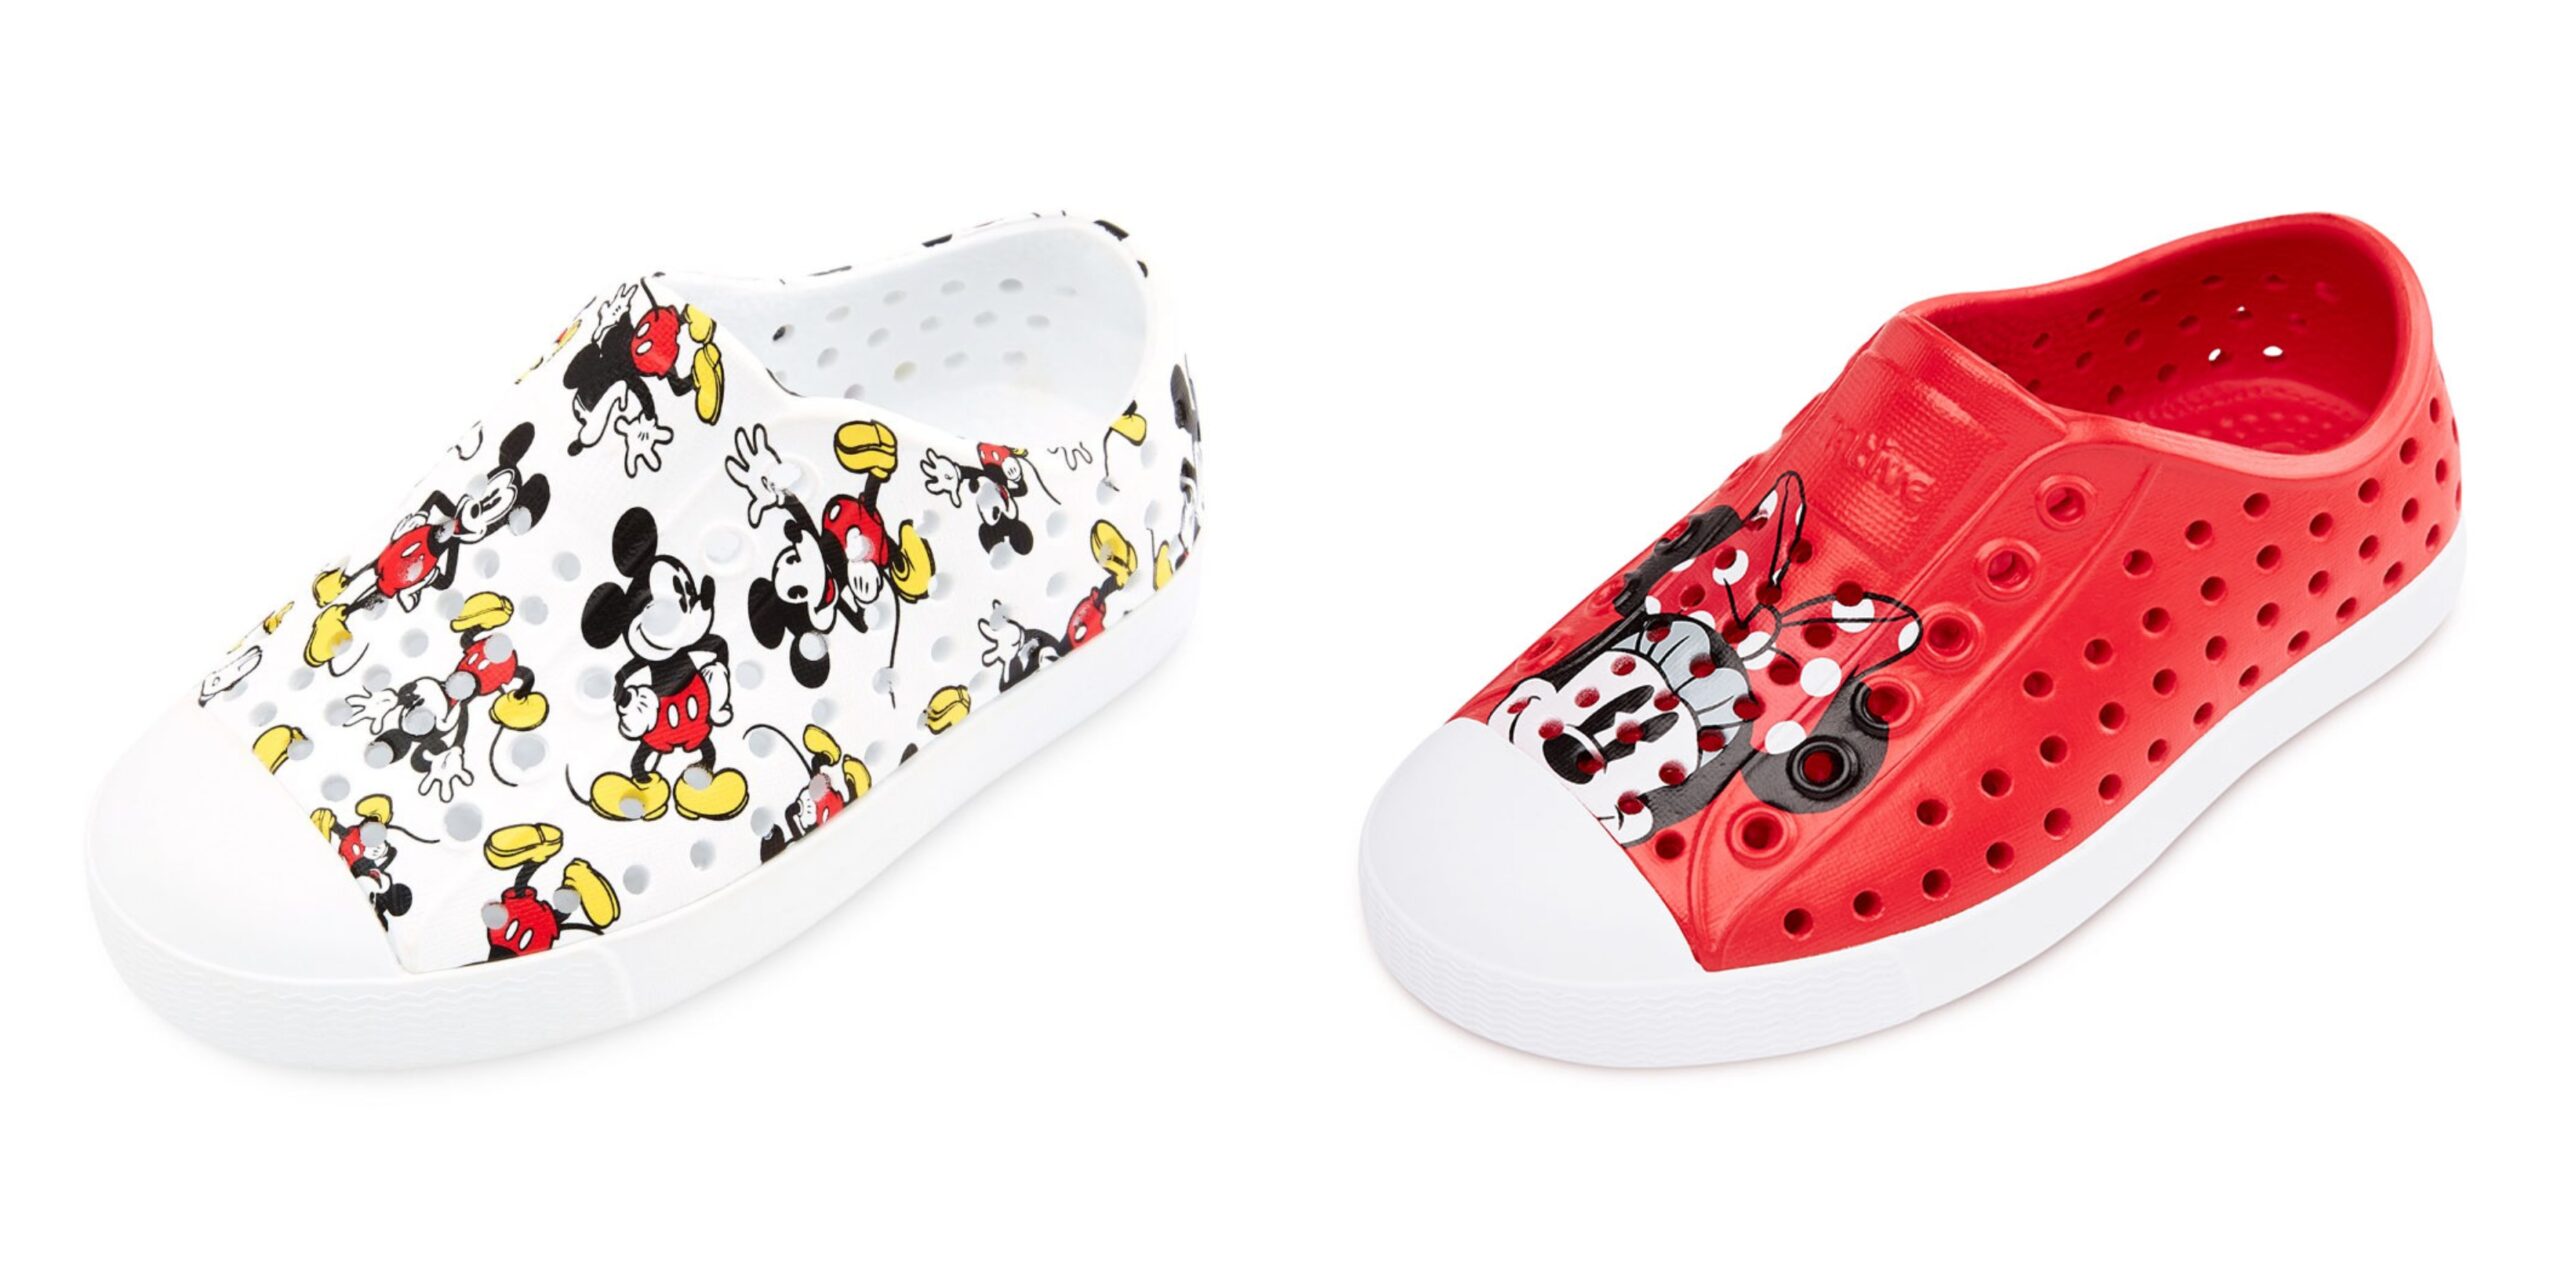 Disney Teams Up with Native Shoes for an All-New Collection